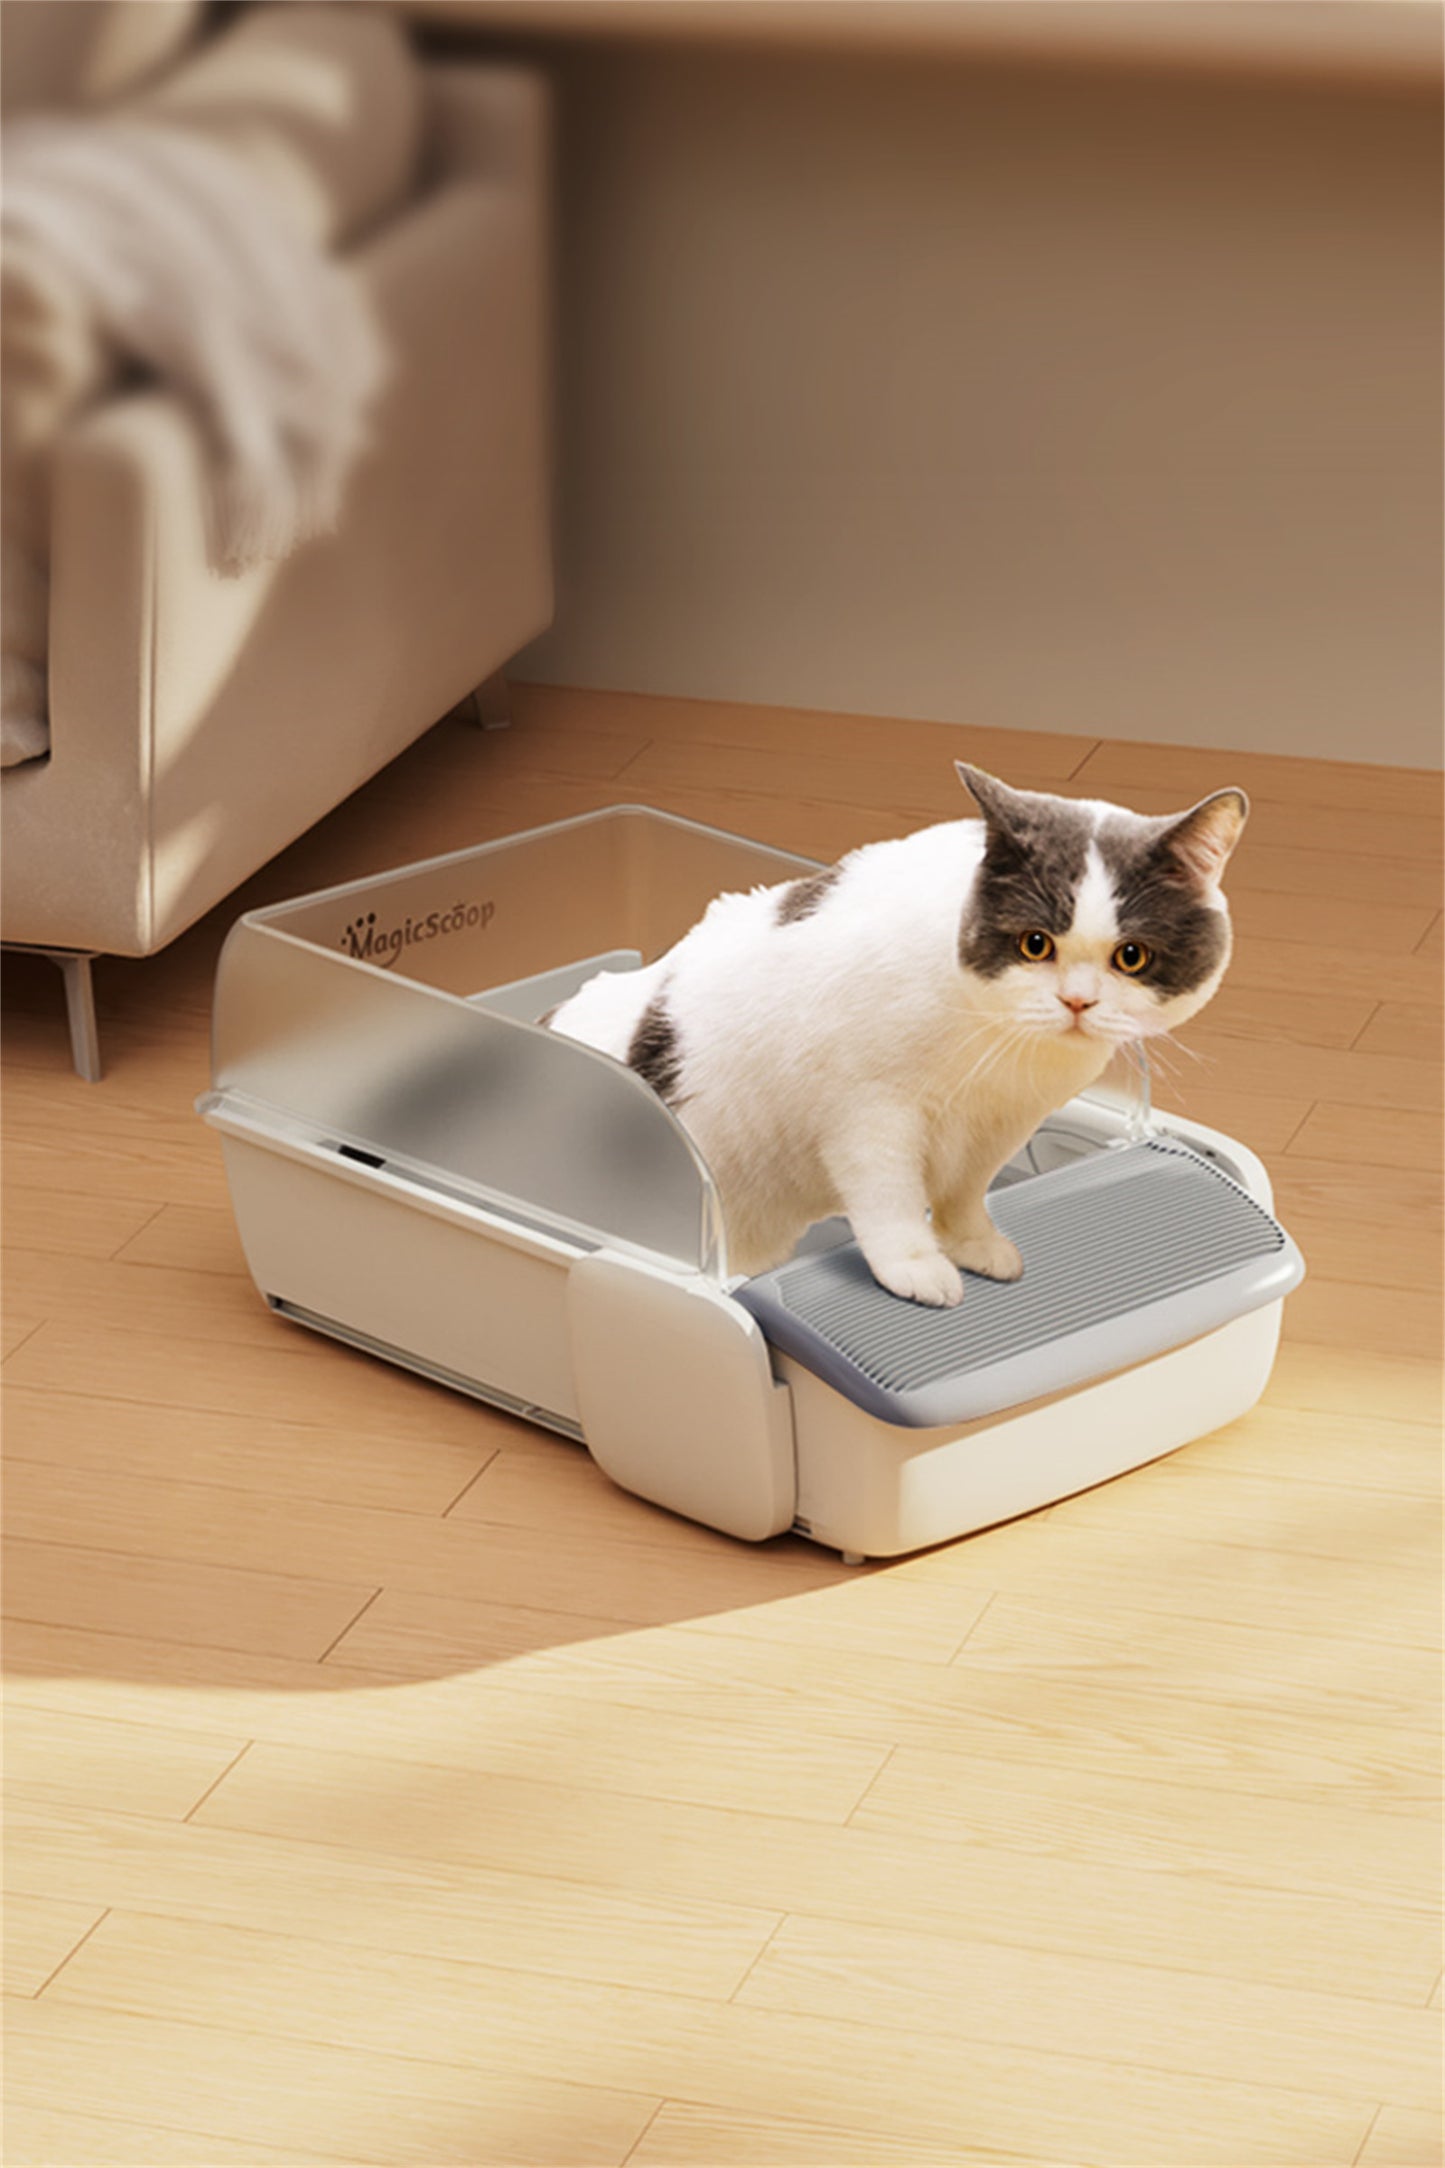 MagicScoop Open-Style Fully Automatic Litter Box Self Cleaning Scooping Litter Robot with Extra-Large Transh Bin